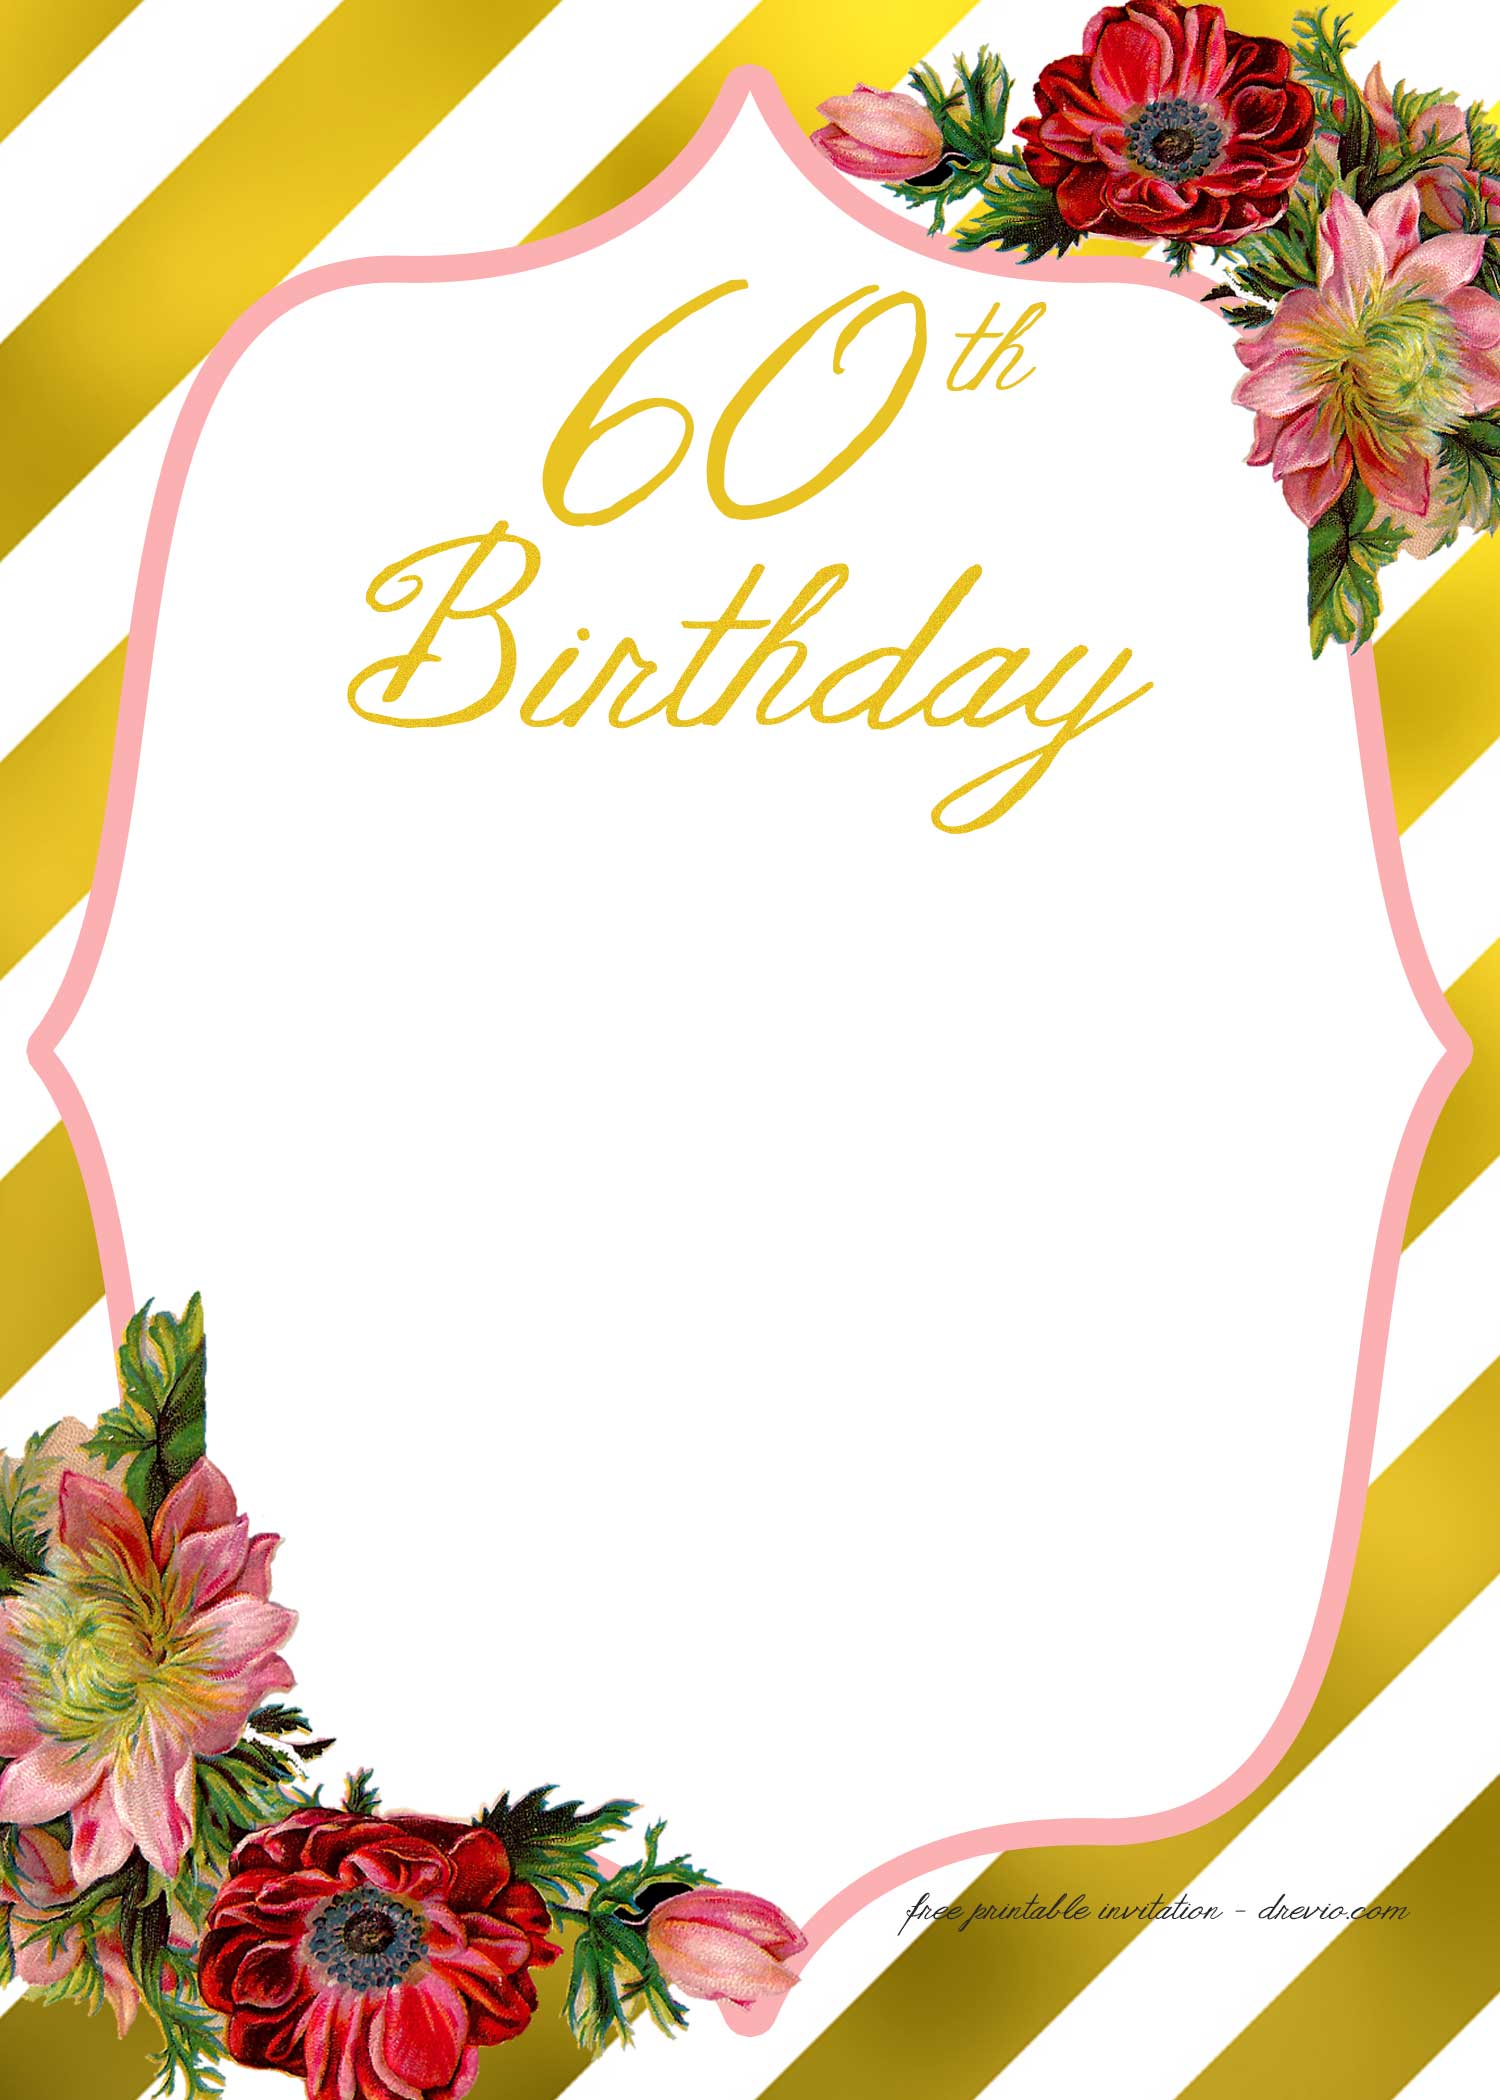 Adult Birthday Invitations Template – for 50th years old and up